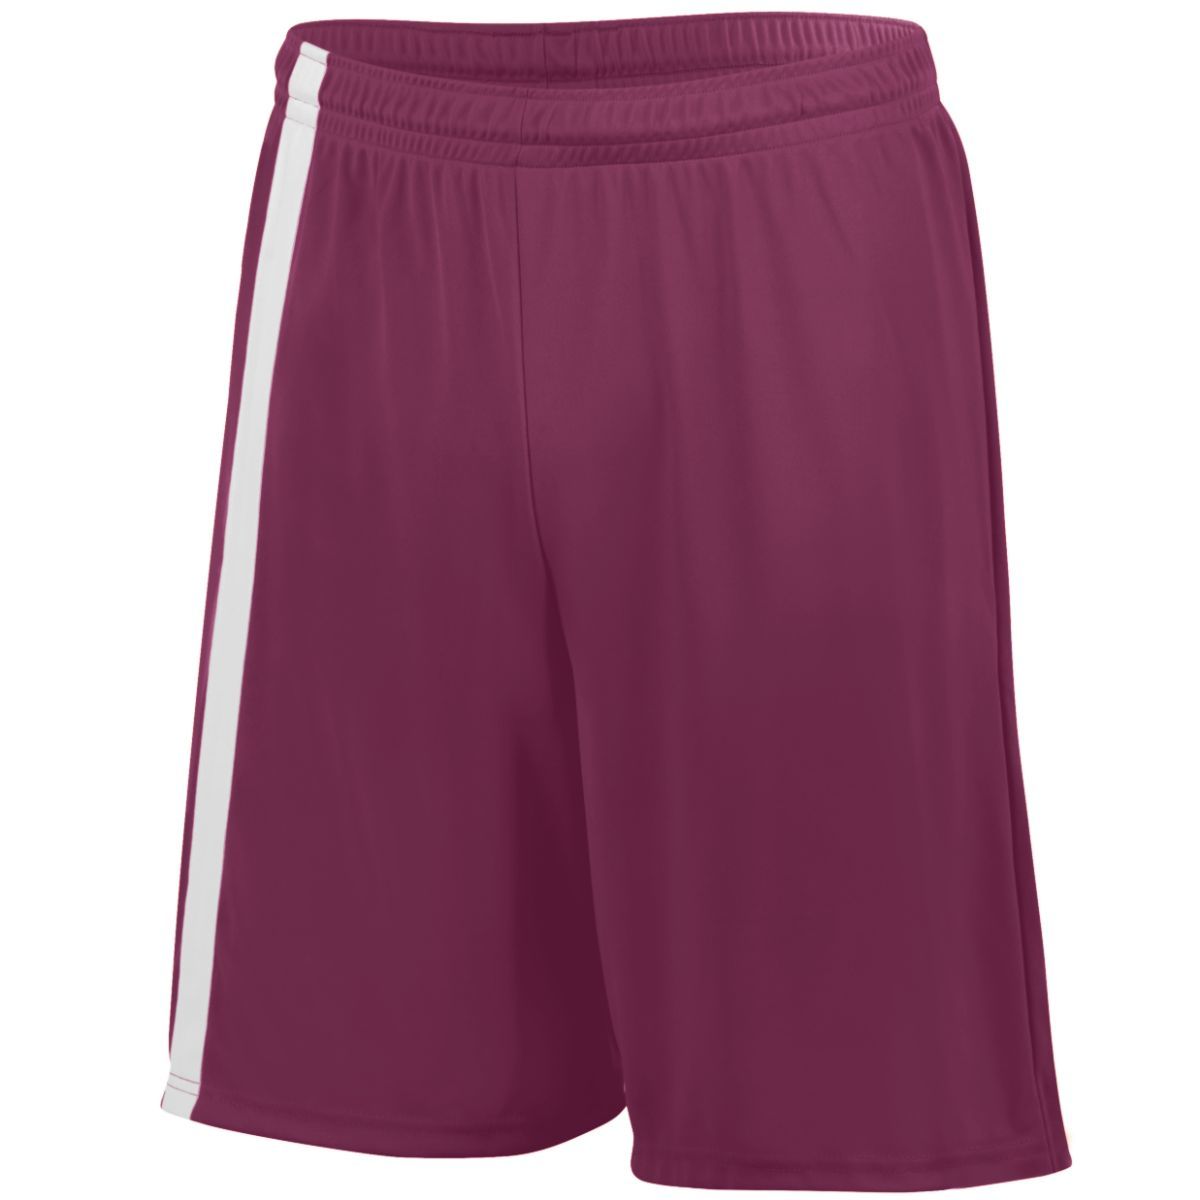 Augusta Sportswear Attacking Third Shorts in Maroon/White  -Part of the Adult, Adult-Shorts, Augusta-Products, Soccer, All-Sports-1 product lines at KanaleyCreations.com